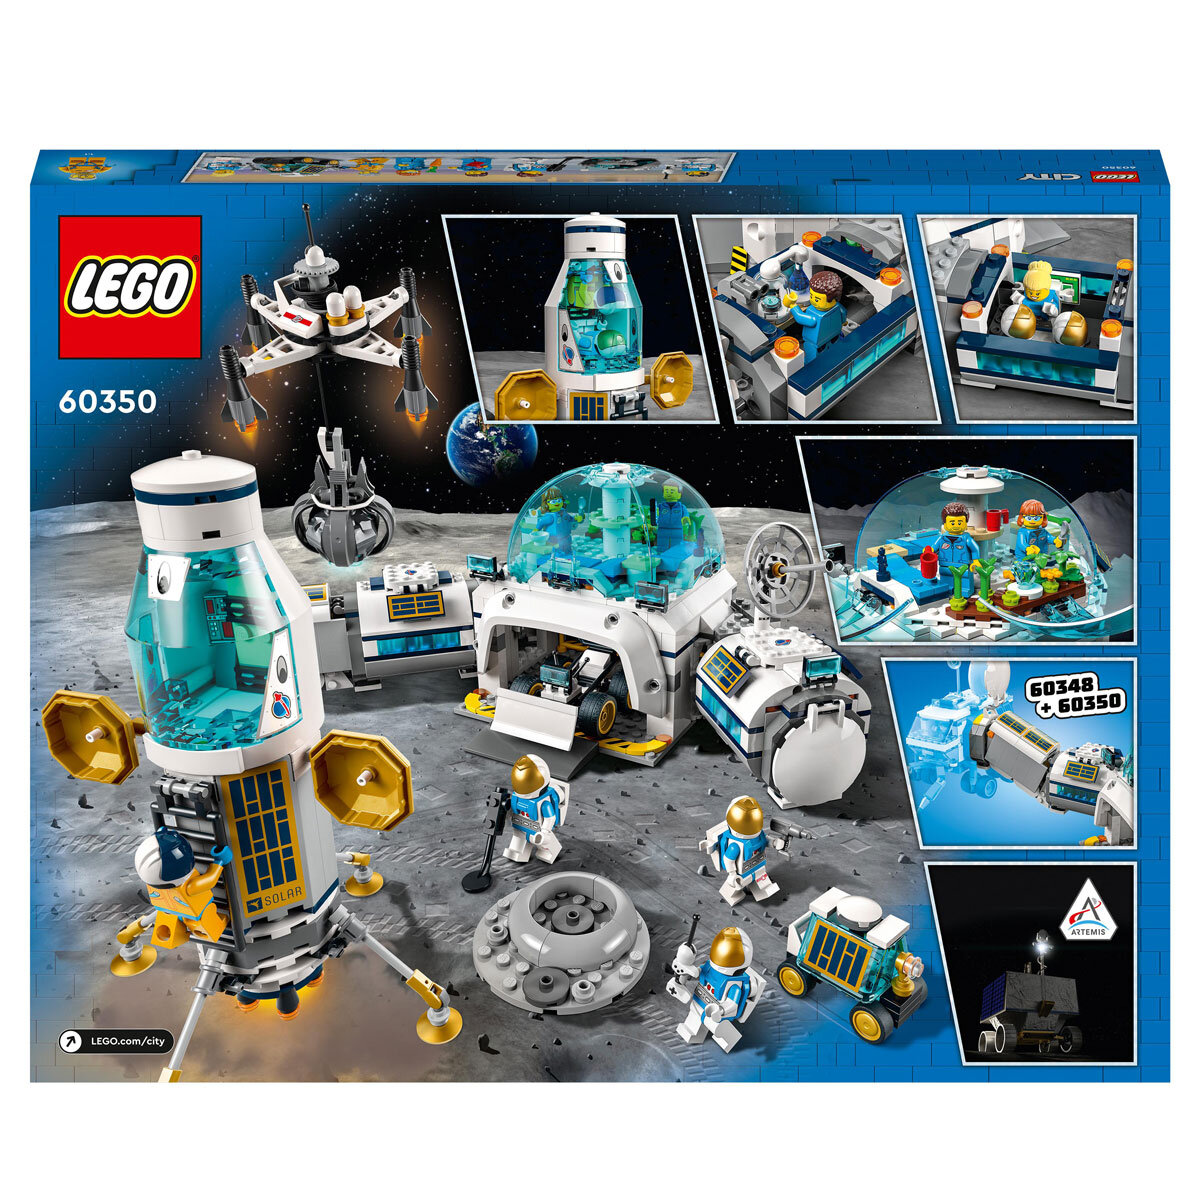 Buy LEGO City Space Lunar Research Base Back of Box Image at Costco.co.uk